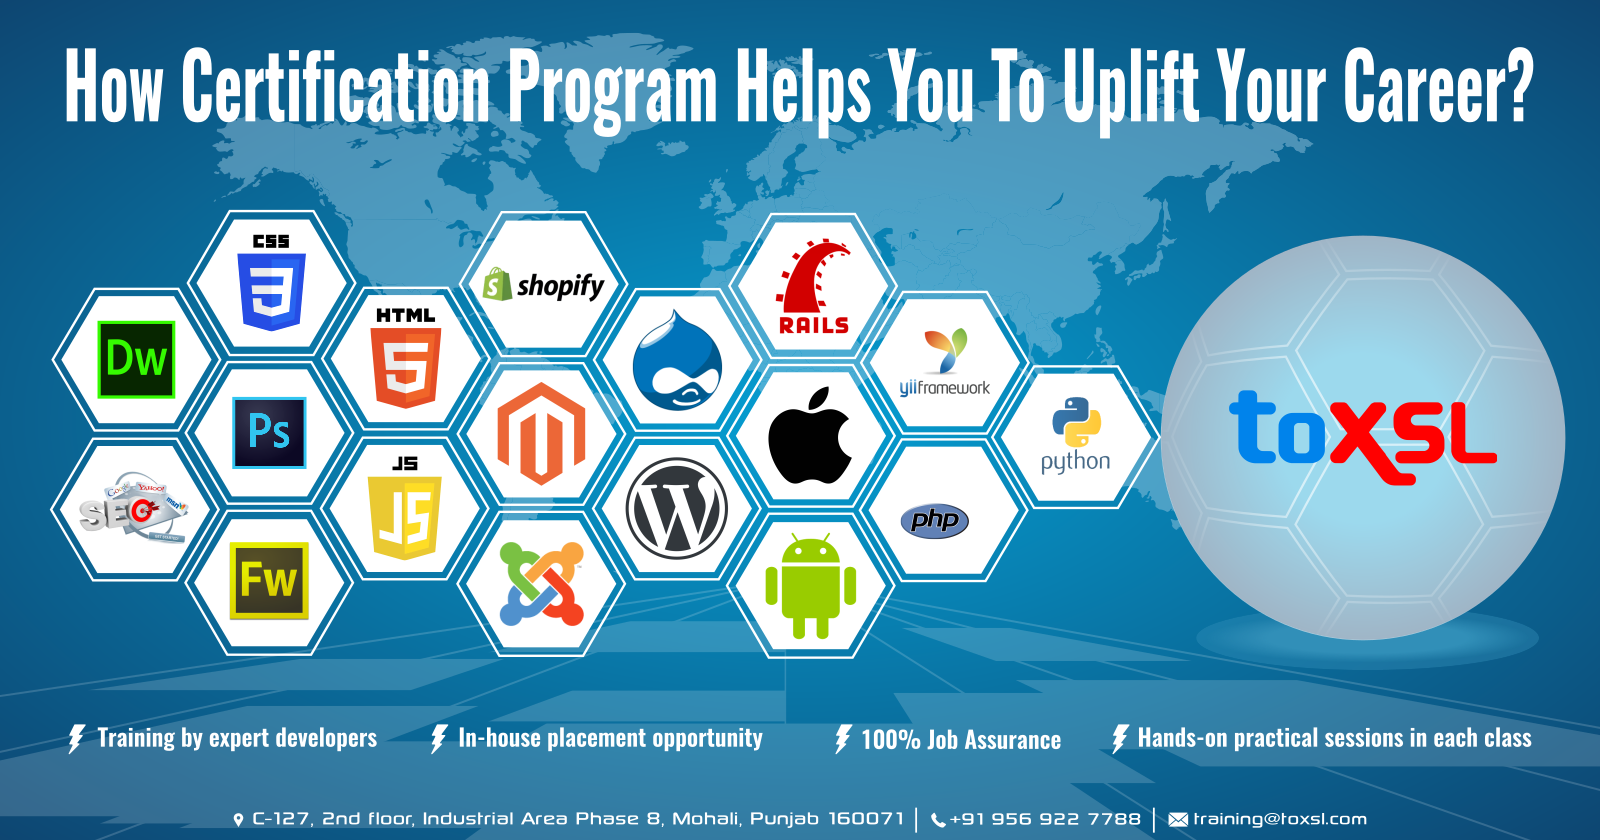 How Certification Program Helps You To Uplift Your Career?